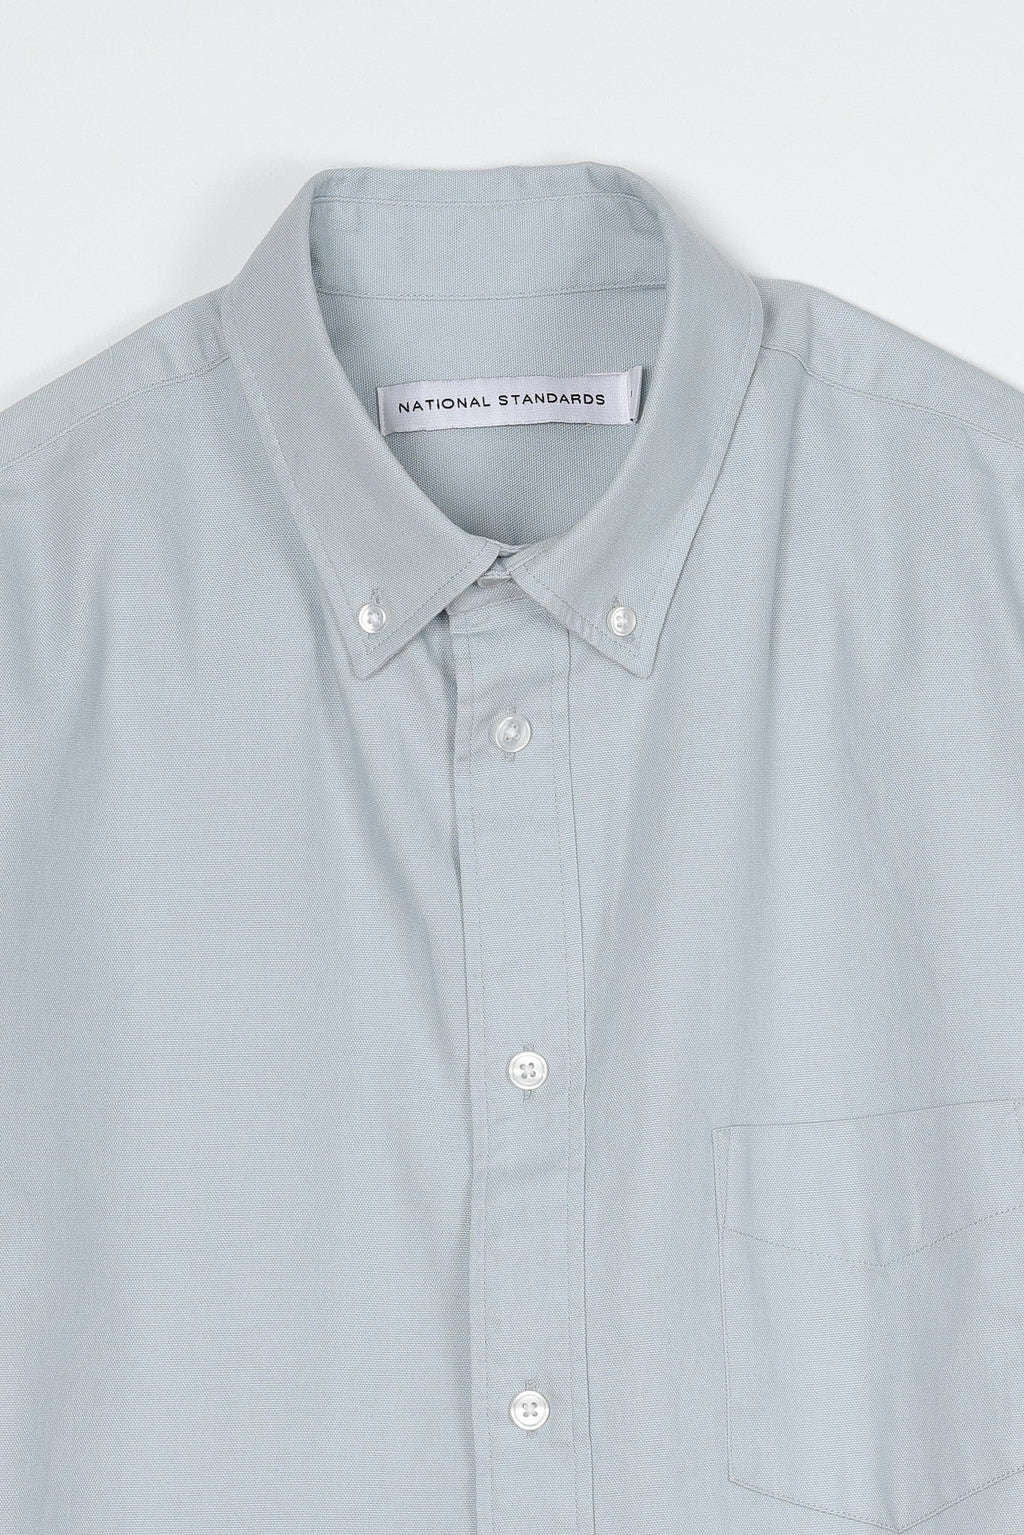 Japanese Washed Oxford in Light Blue 06